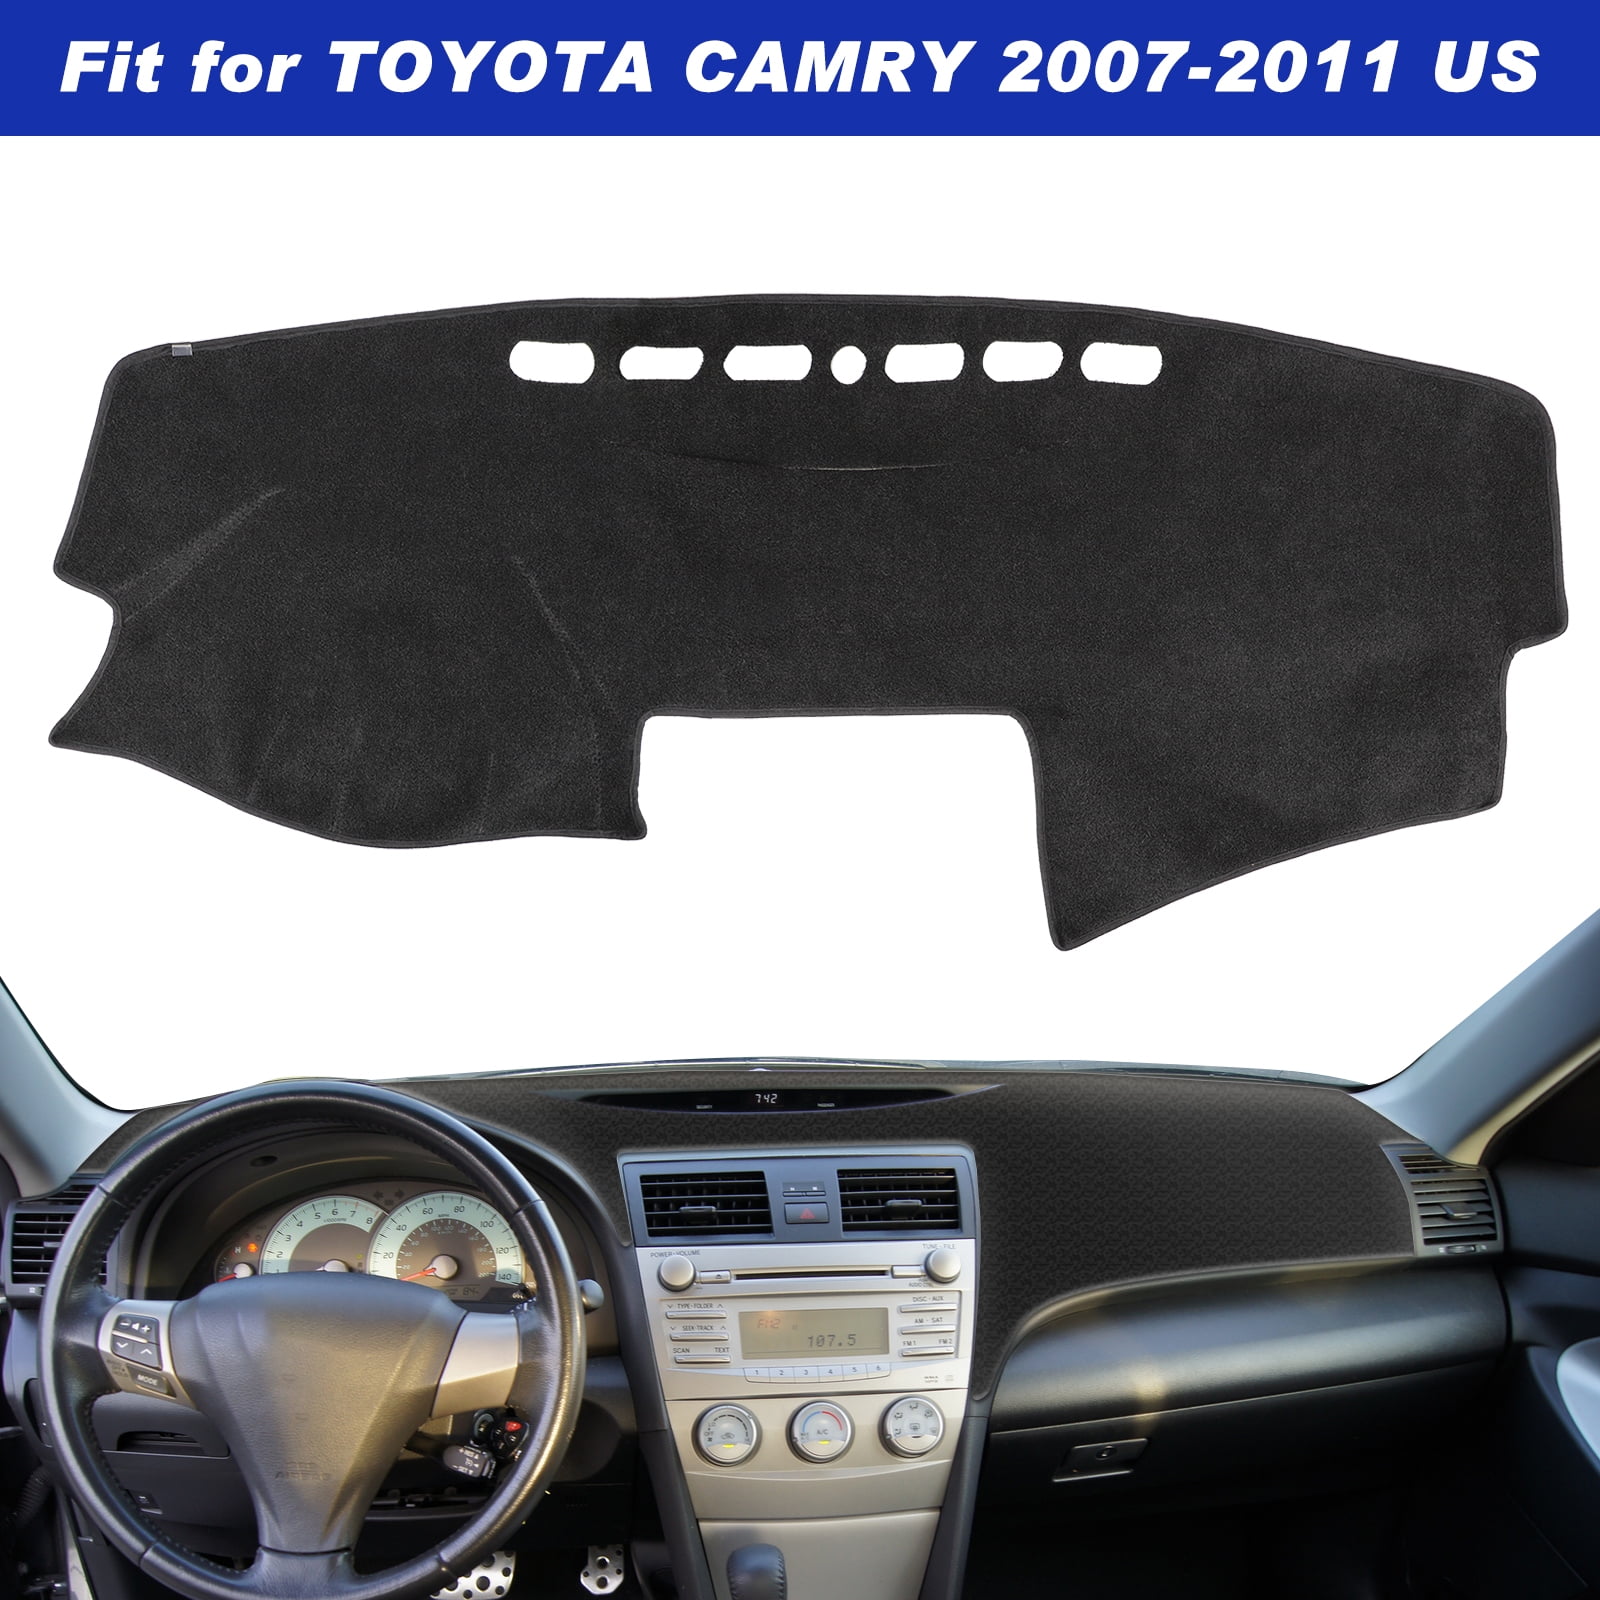 Car Dashboard Cover Mat, EEEkit Dashboard Carpet Pad Compatible with Toyota  Camry 2007-2011 US, Black